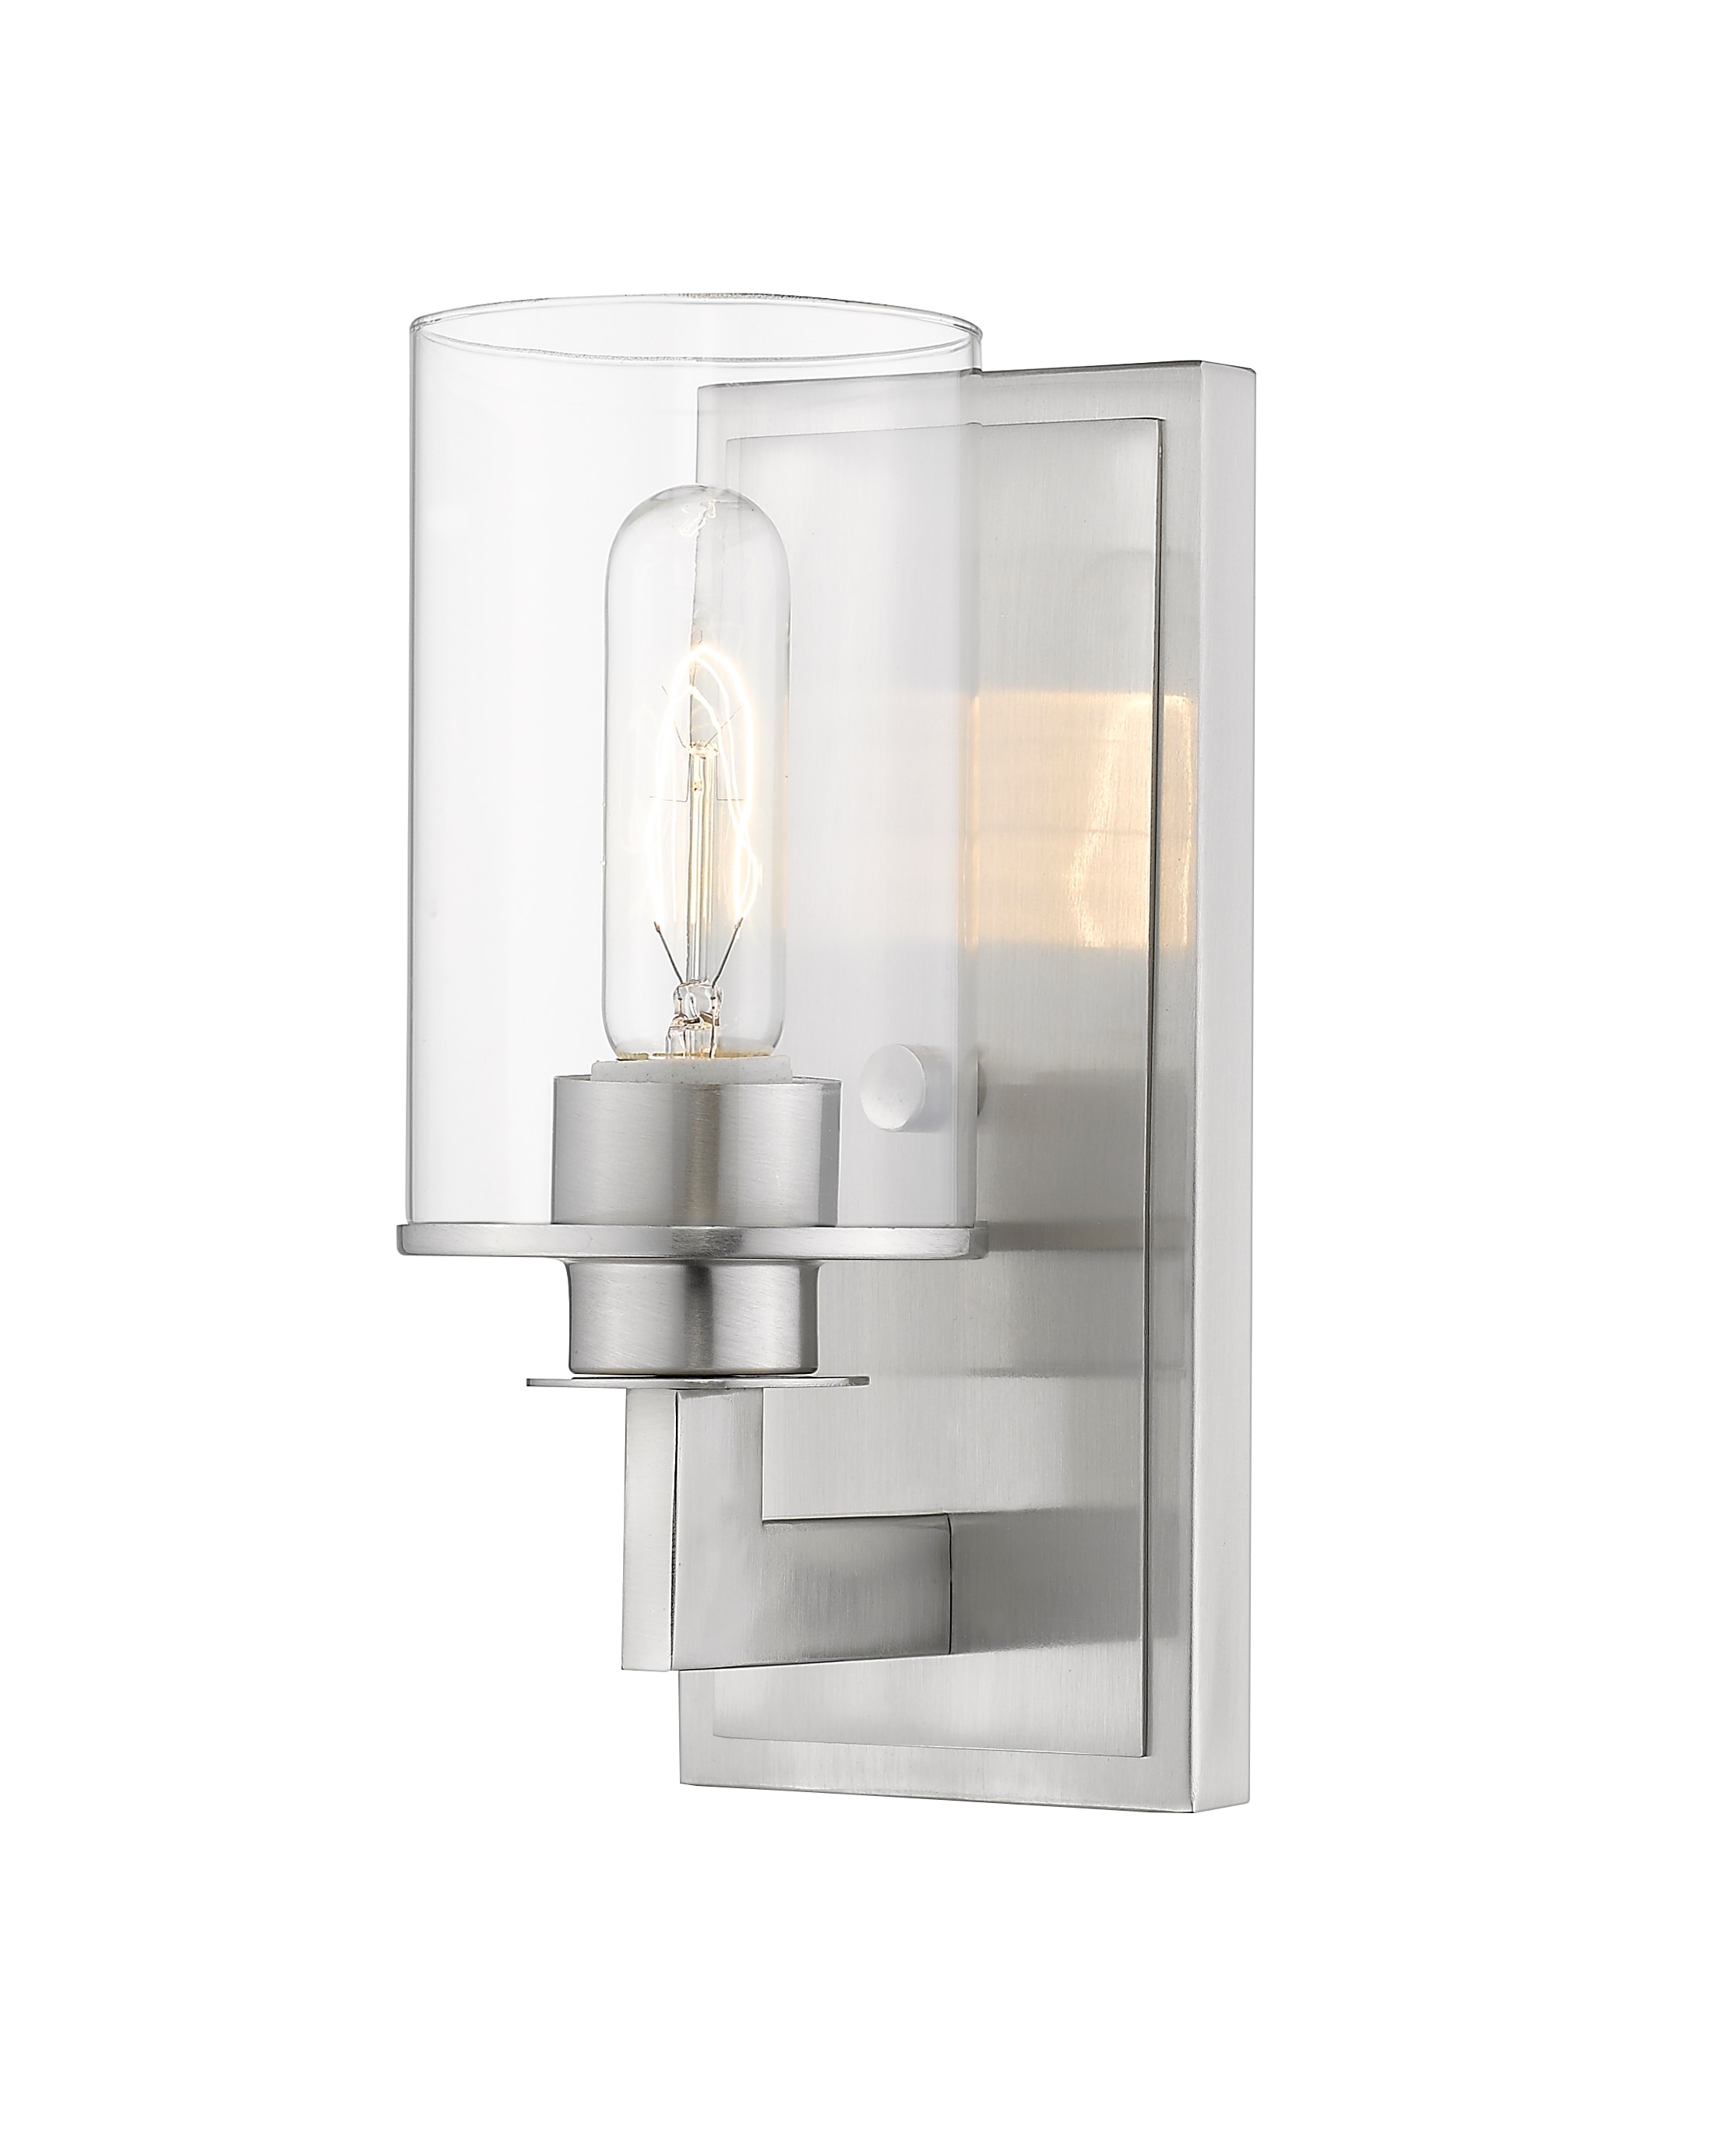 Z-Lite Savannah 4.5-in W 1-Light Brushed Nickel Modern/Contemporary Wall  Sconce Lowes.com